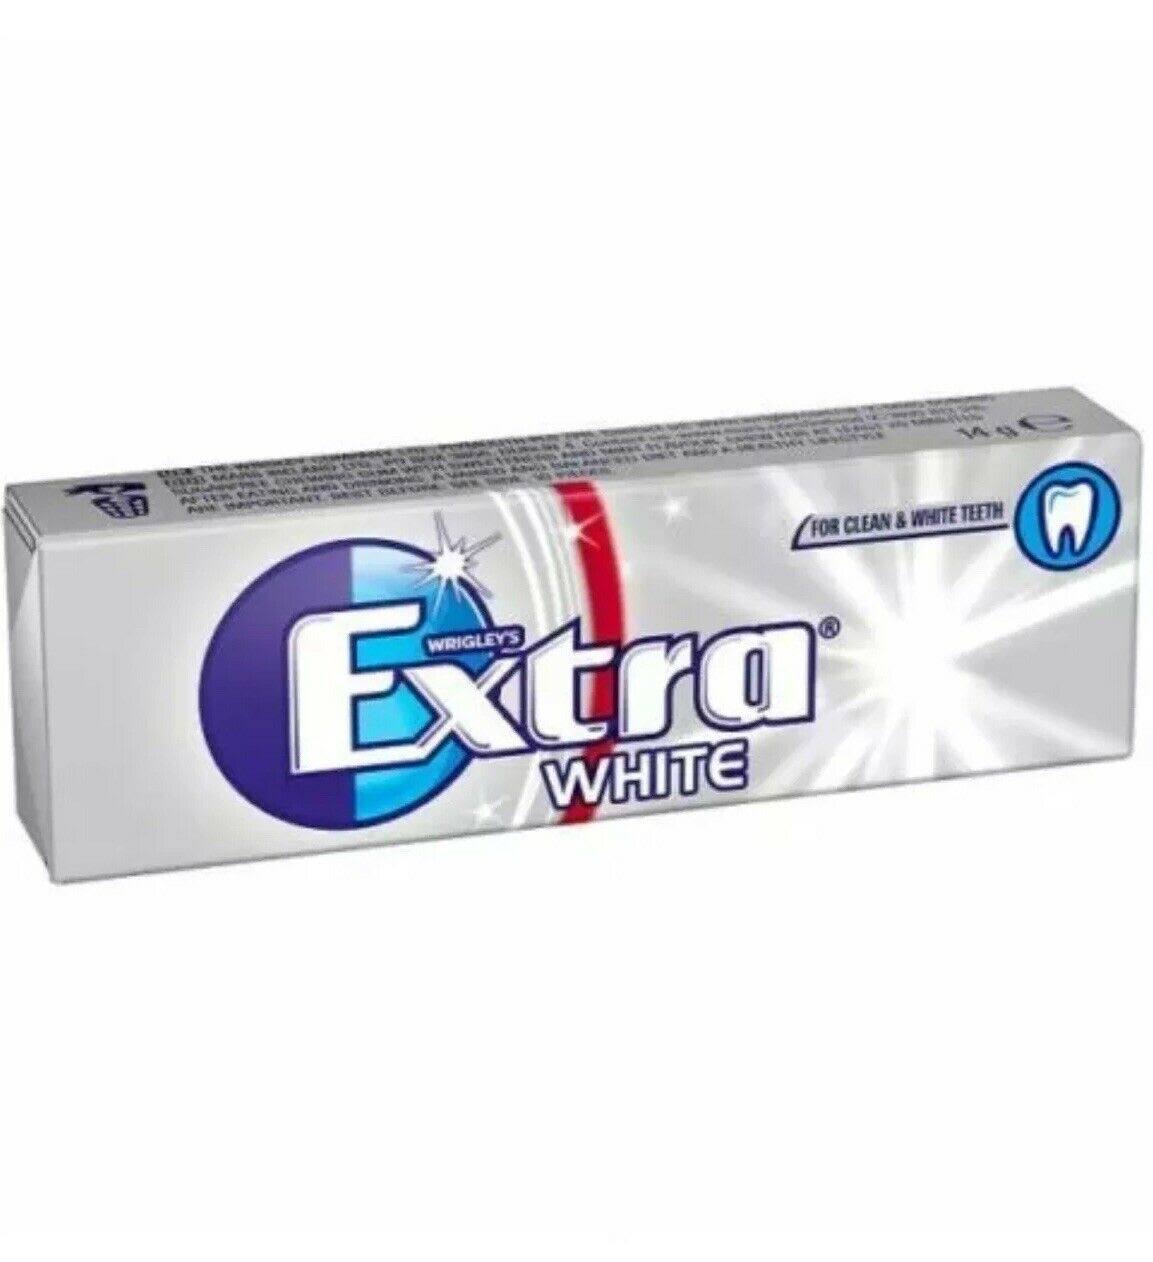 Wrigley's Extra Ice White Chewing Gum